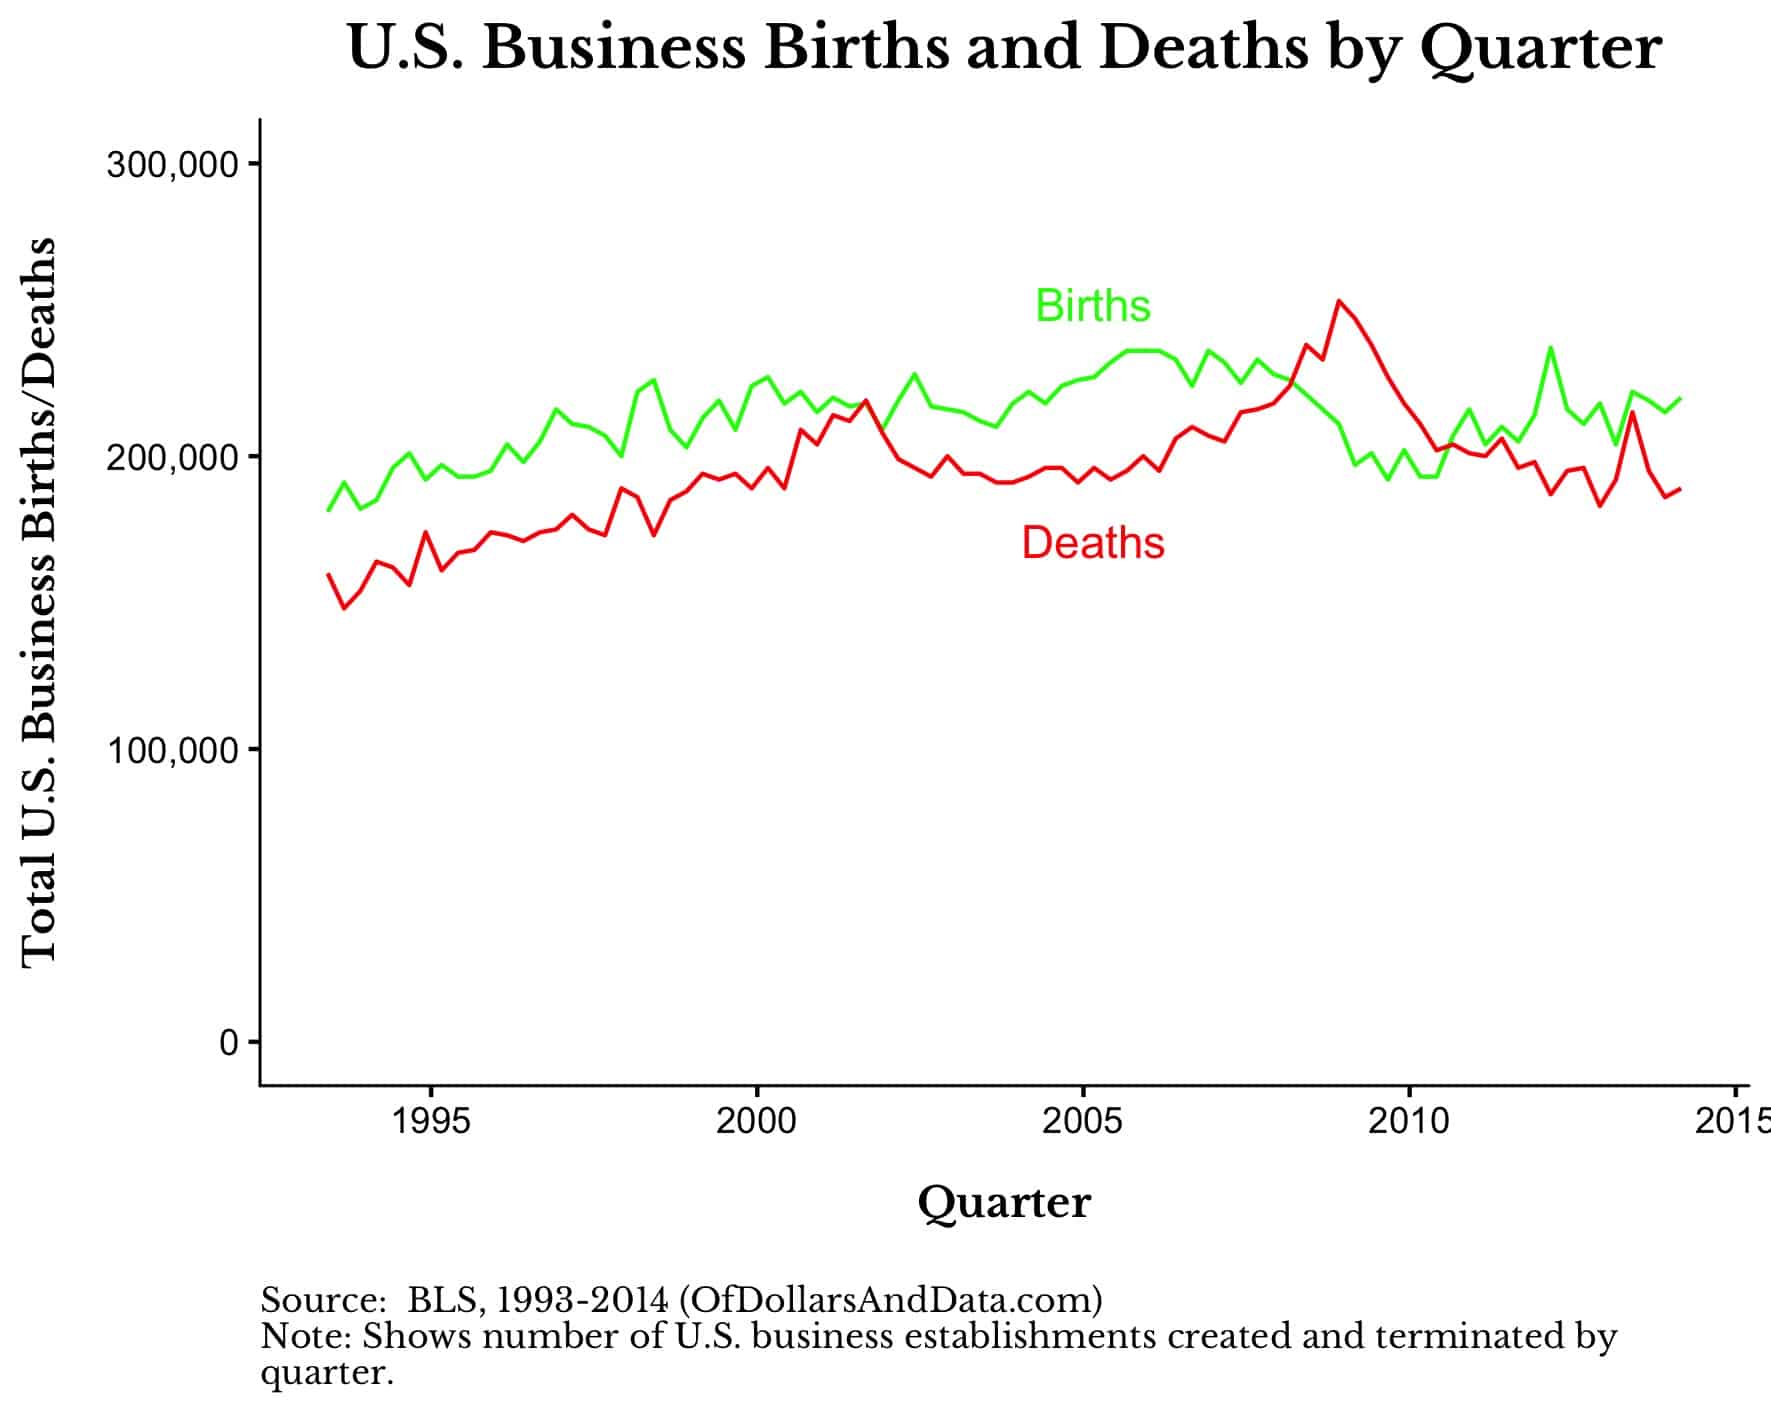 US business births and deaths by quarter from the early 1990s to 2015.